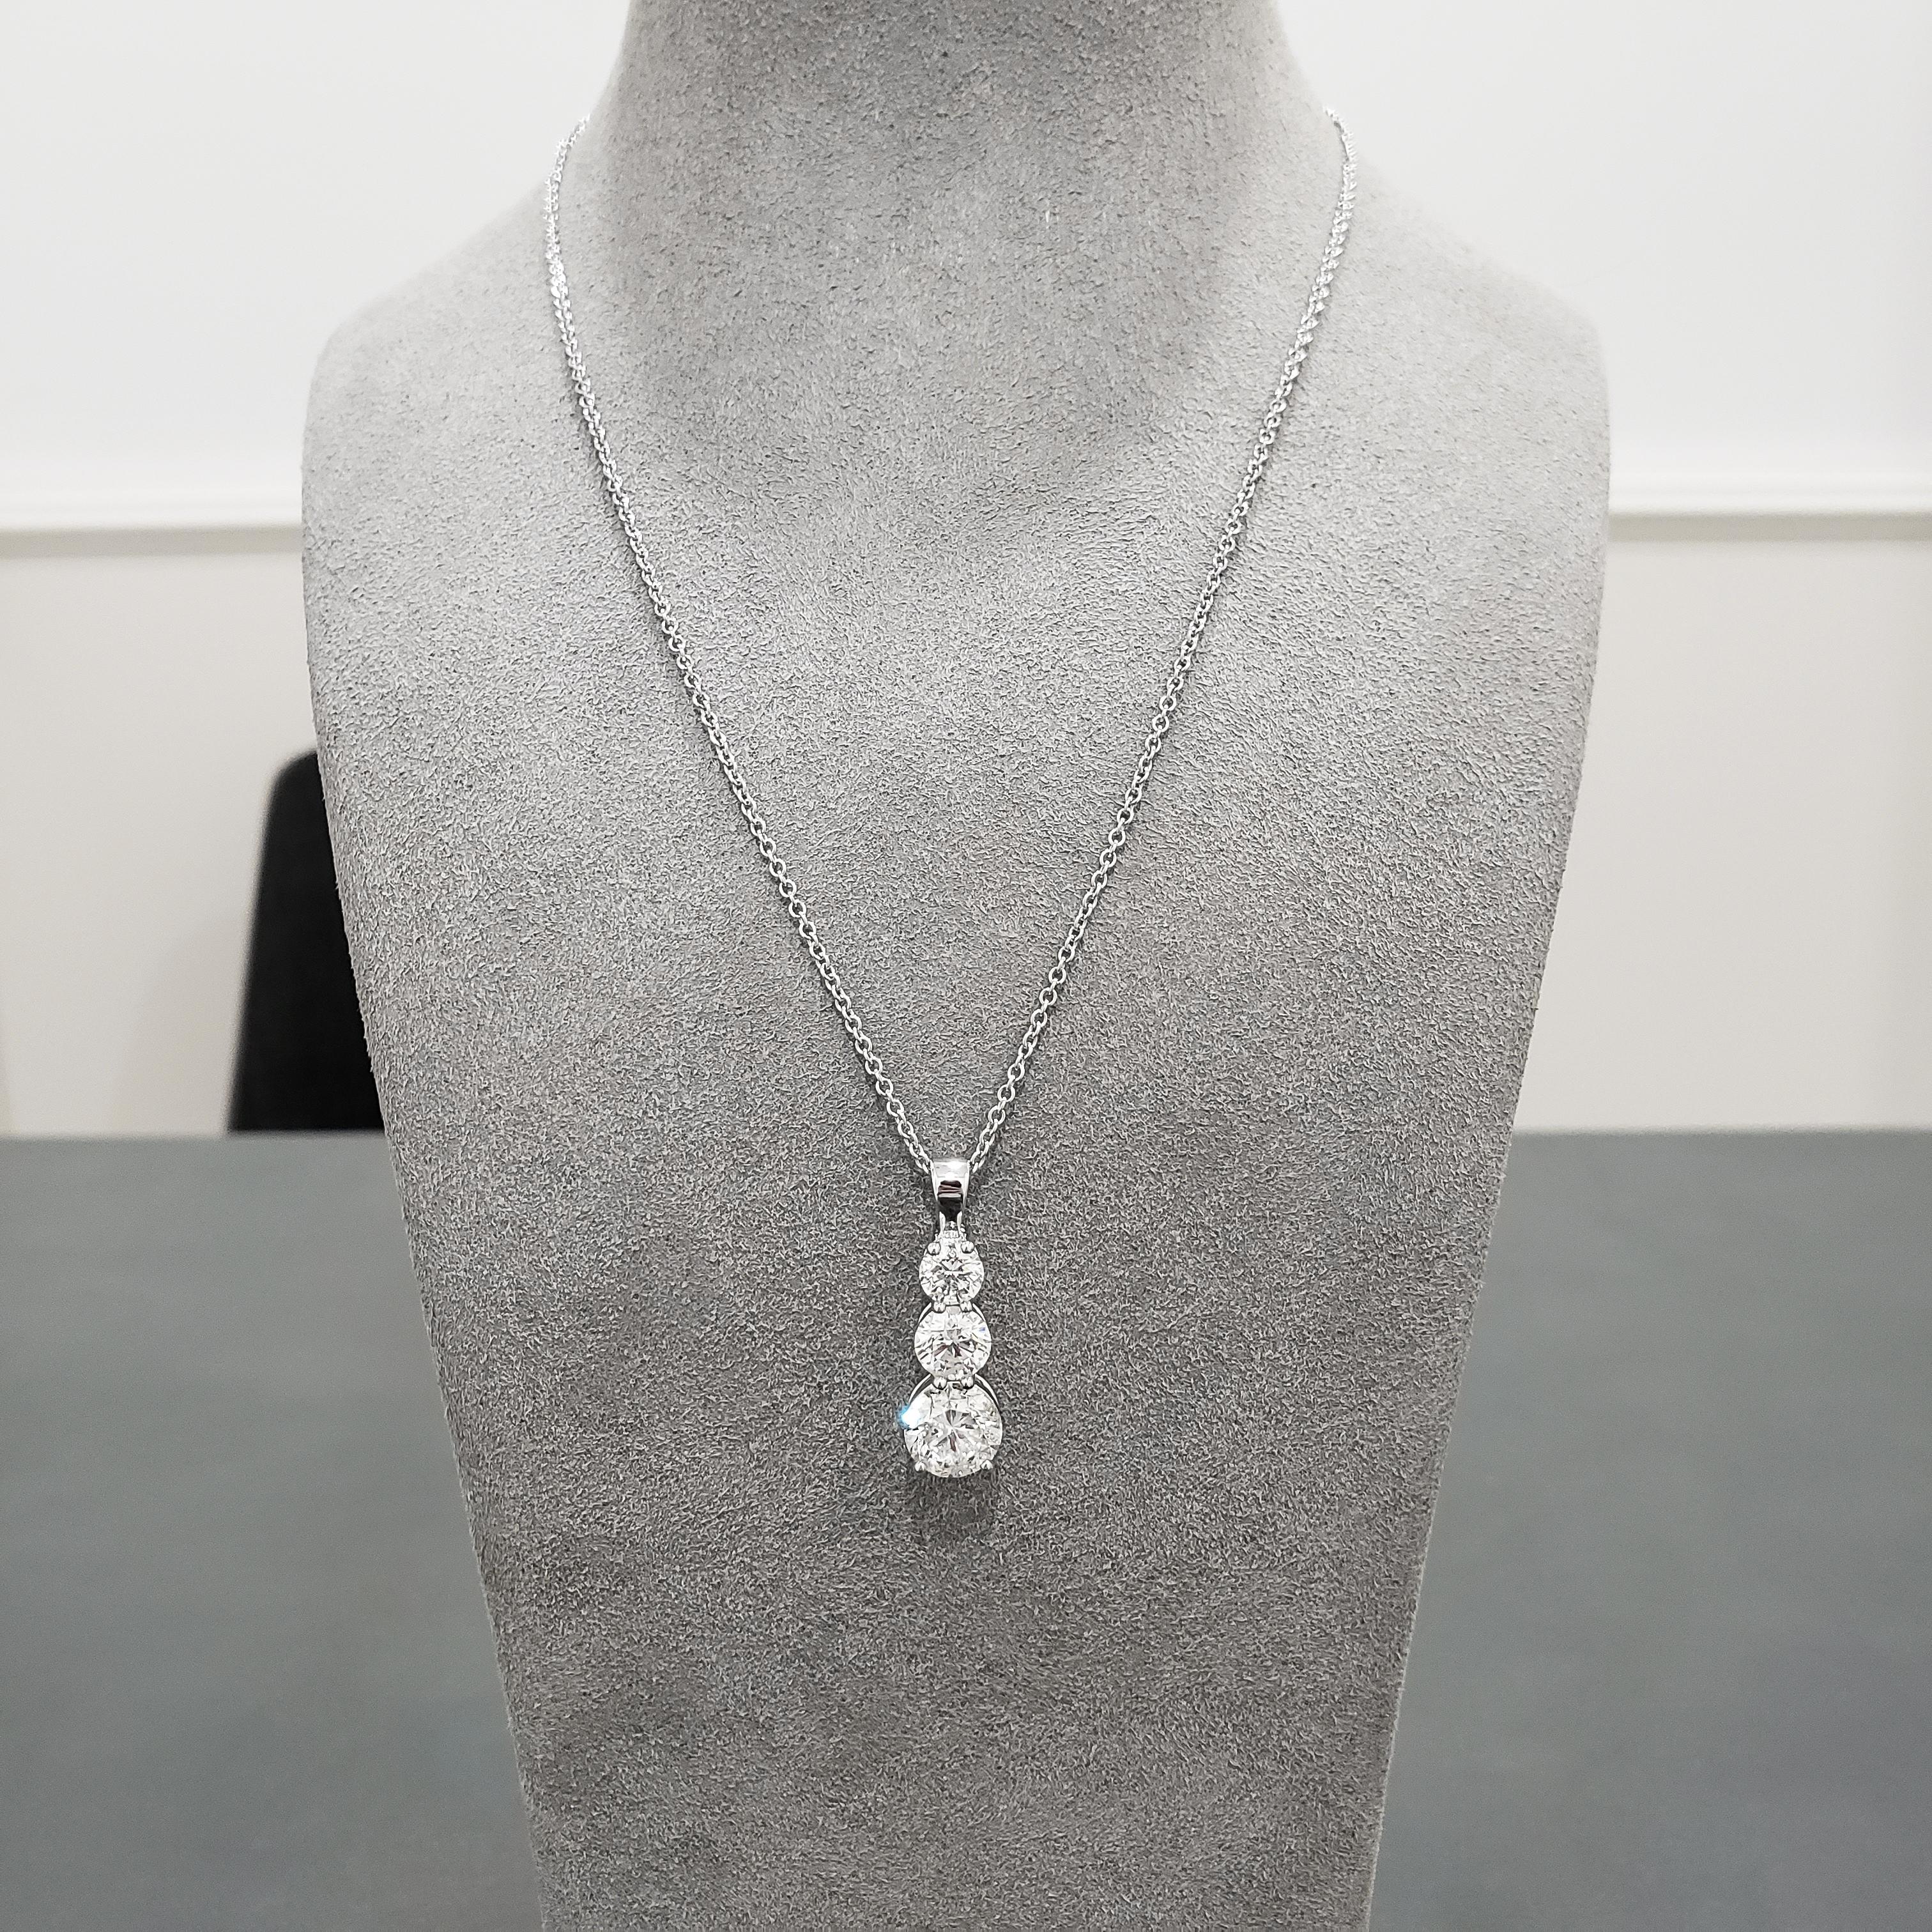 Features three graduating round diamonds set in a brilliant drop setting. Diamonds weigh 2.50 carats, 1.12 carats, 0.70 carats respectively. Suspended on a 18 inch white gold chain. Adjustable 16 - 18 inch white gold chain.

Style available in